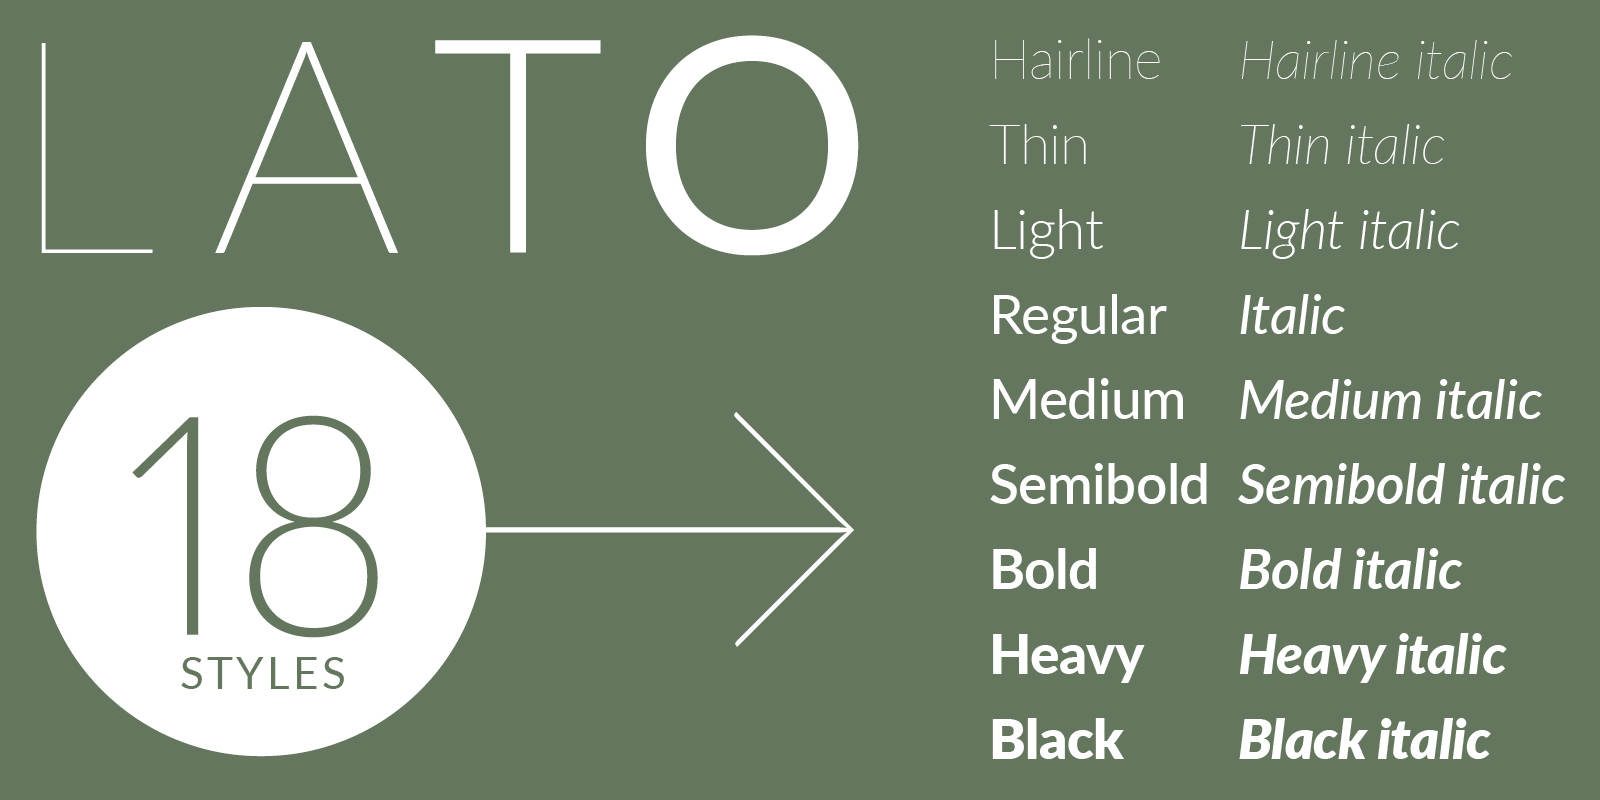 Card displaying Lato typeface in various styles